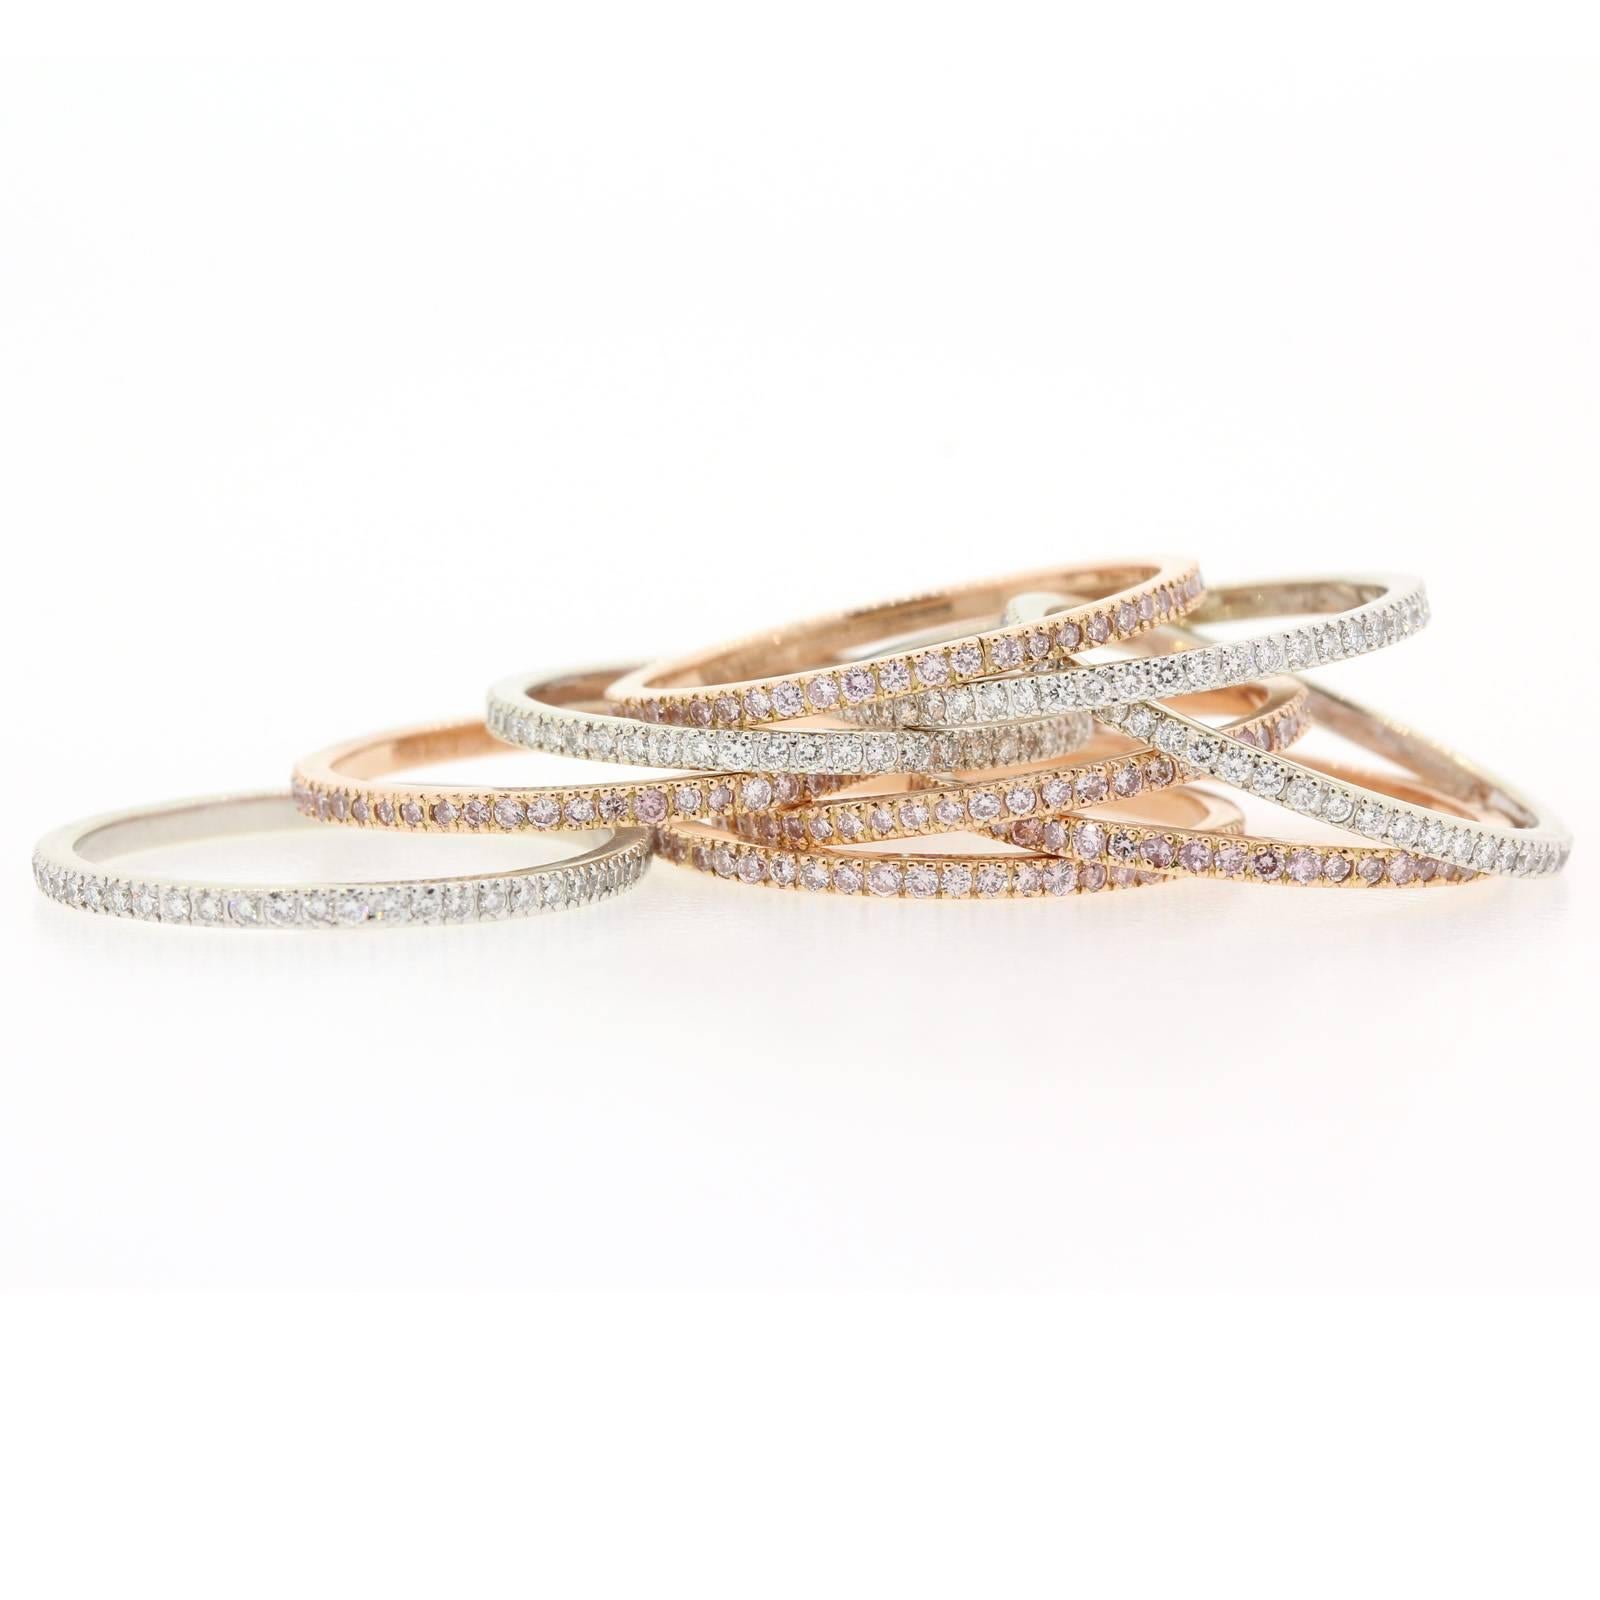 The beautiful set consist of five bands of Natural Pink Diamonds in 14KT Rose gold, and four White Diamond bands in 14KT White gold, all micro pave.  The bands are ring size 5 1/4.  This is the perfect stack!